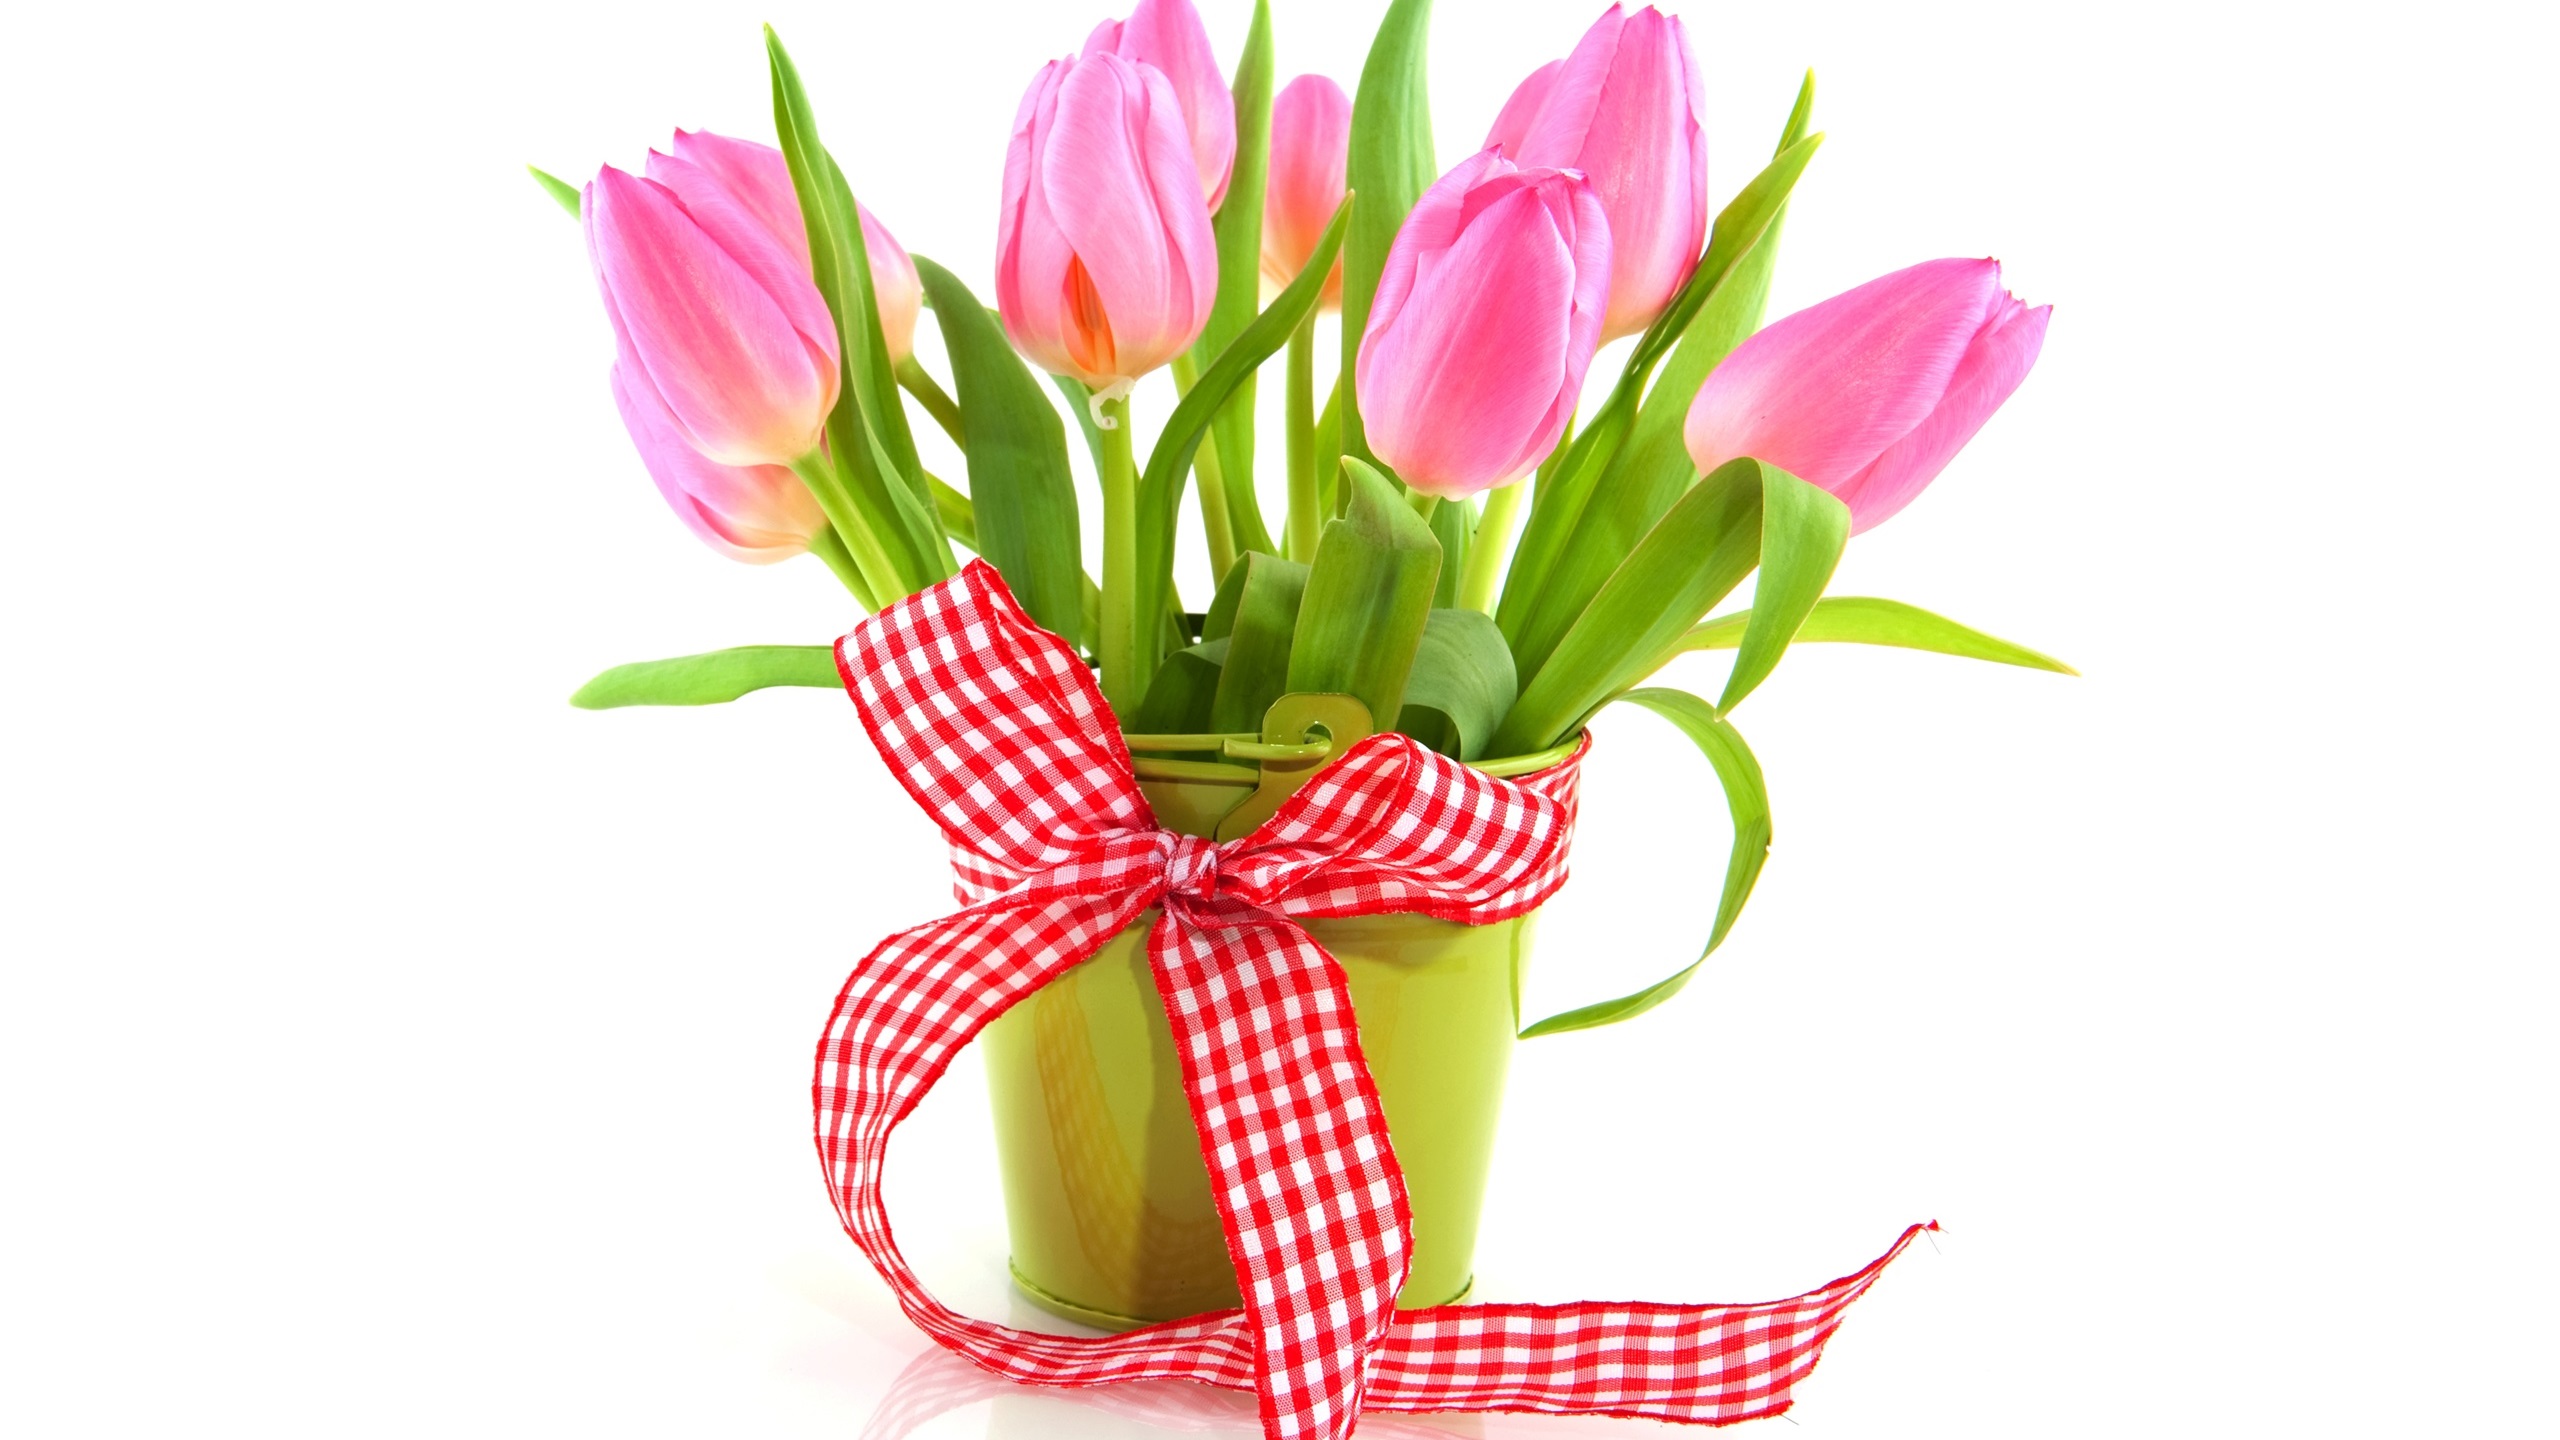 General 2560x1440 tulips flowers white background bucket ribbon simple background